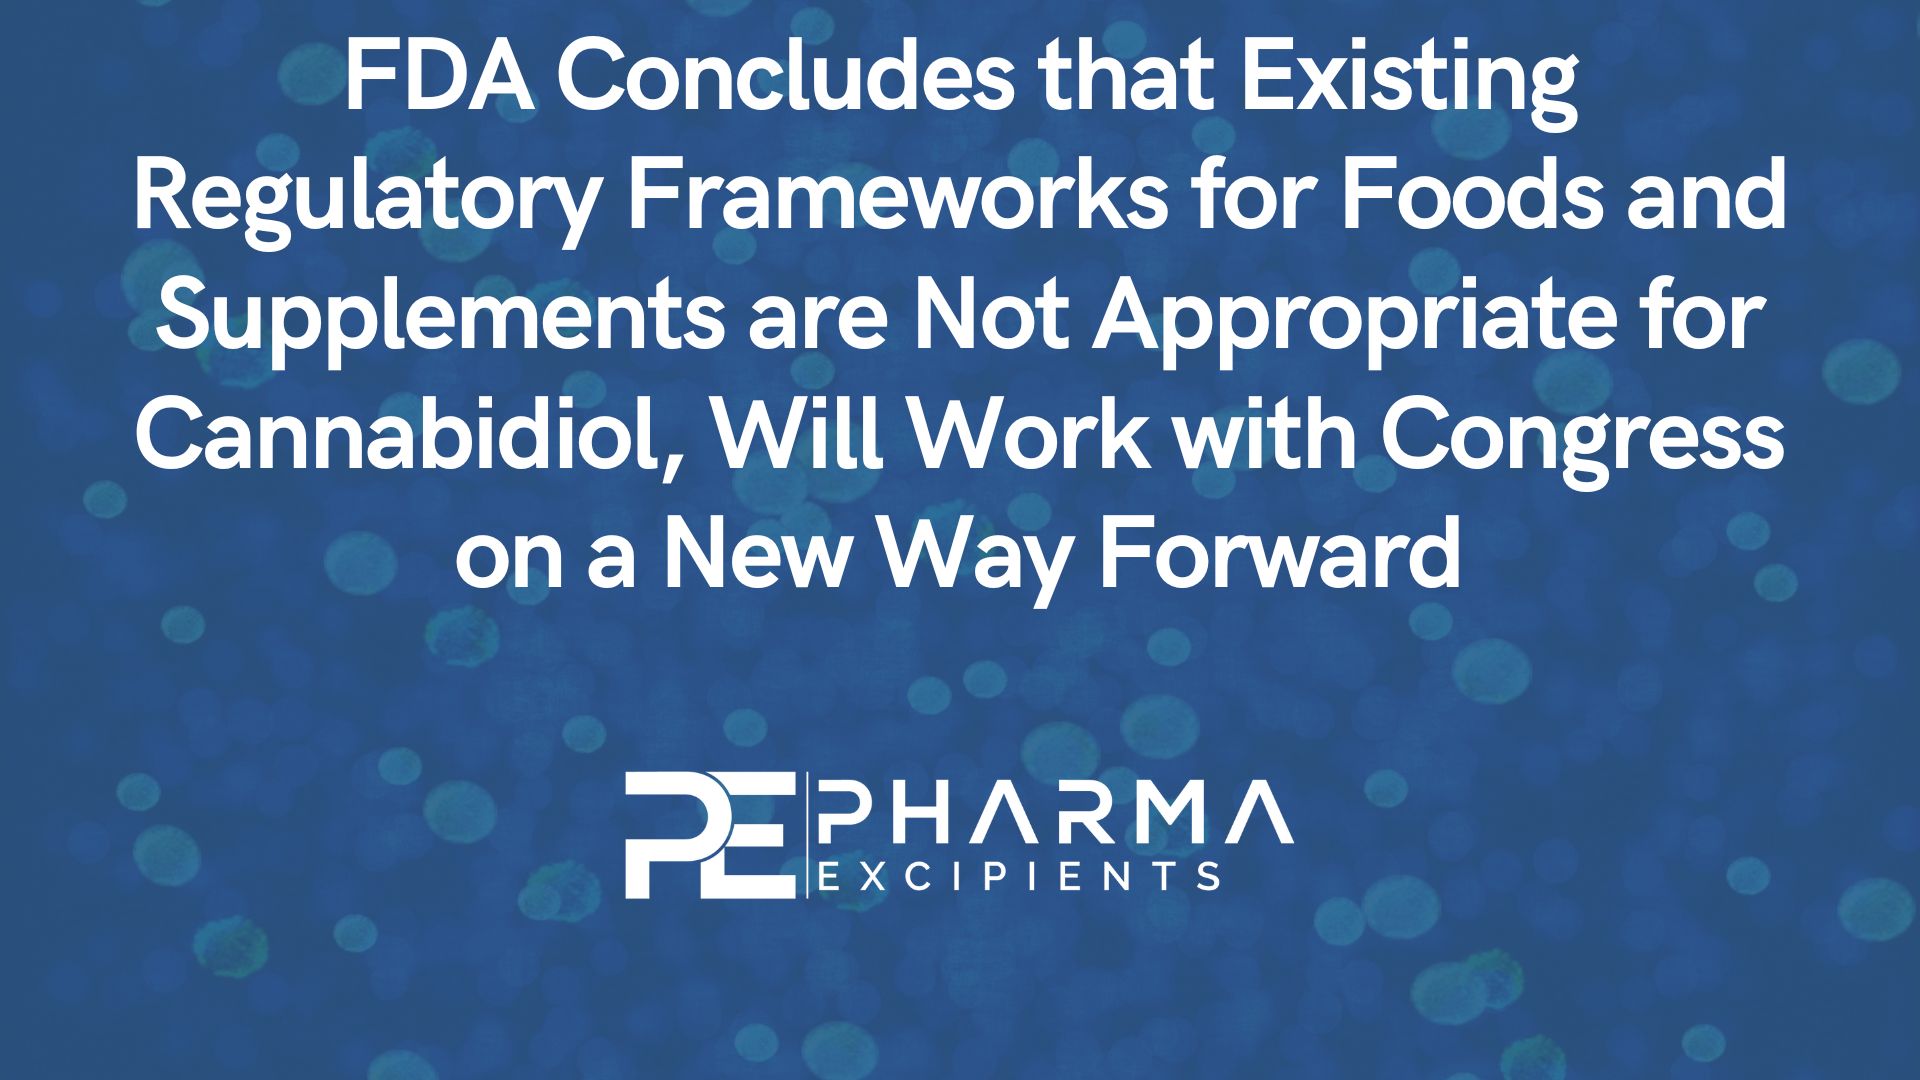 FDA Concludes that Existing Regulatory Frameworks for Foods and Supplements are Not Appropriate for Cannabidiol, Will Work with Congress on a New Way Forward